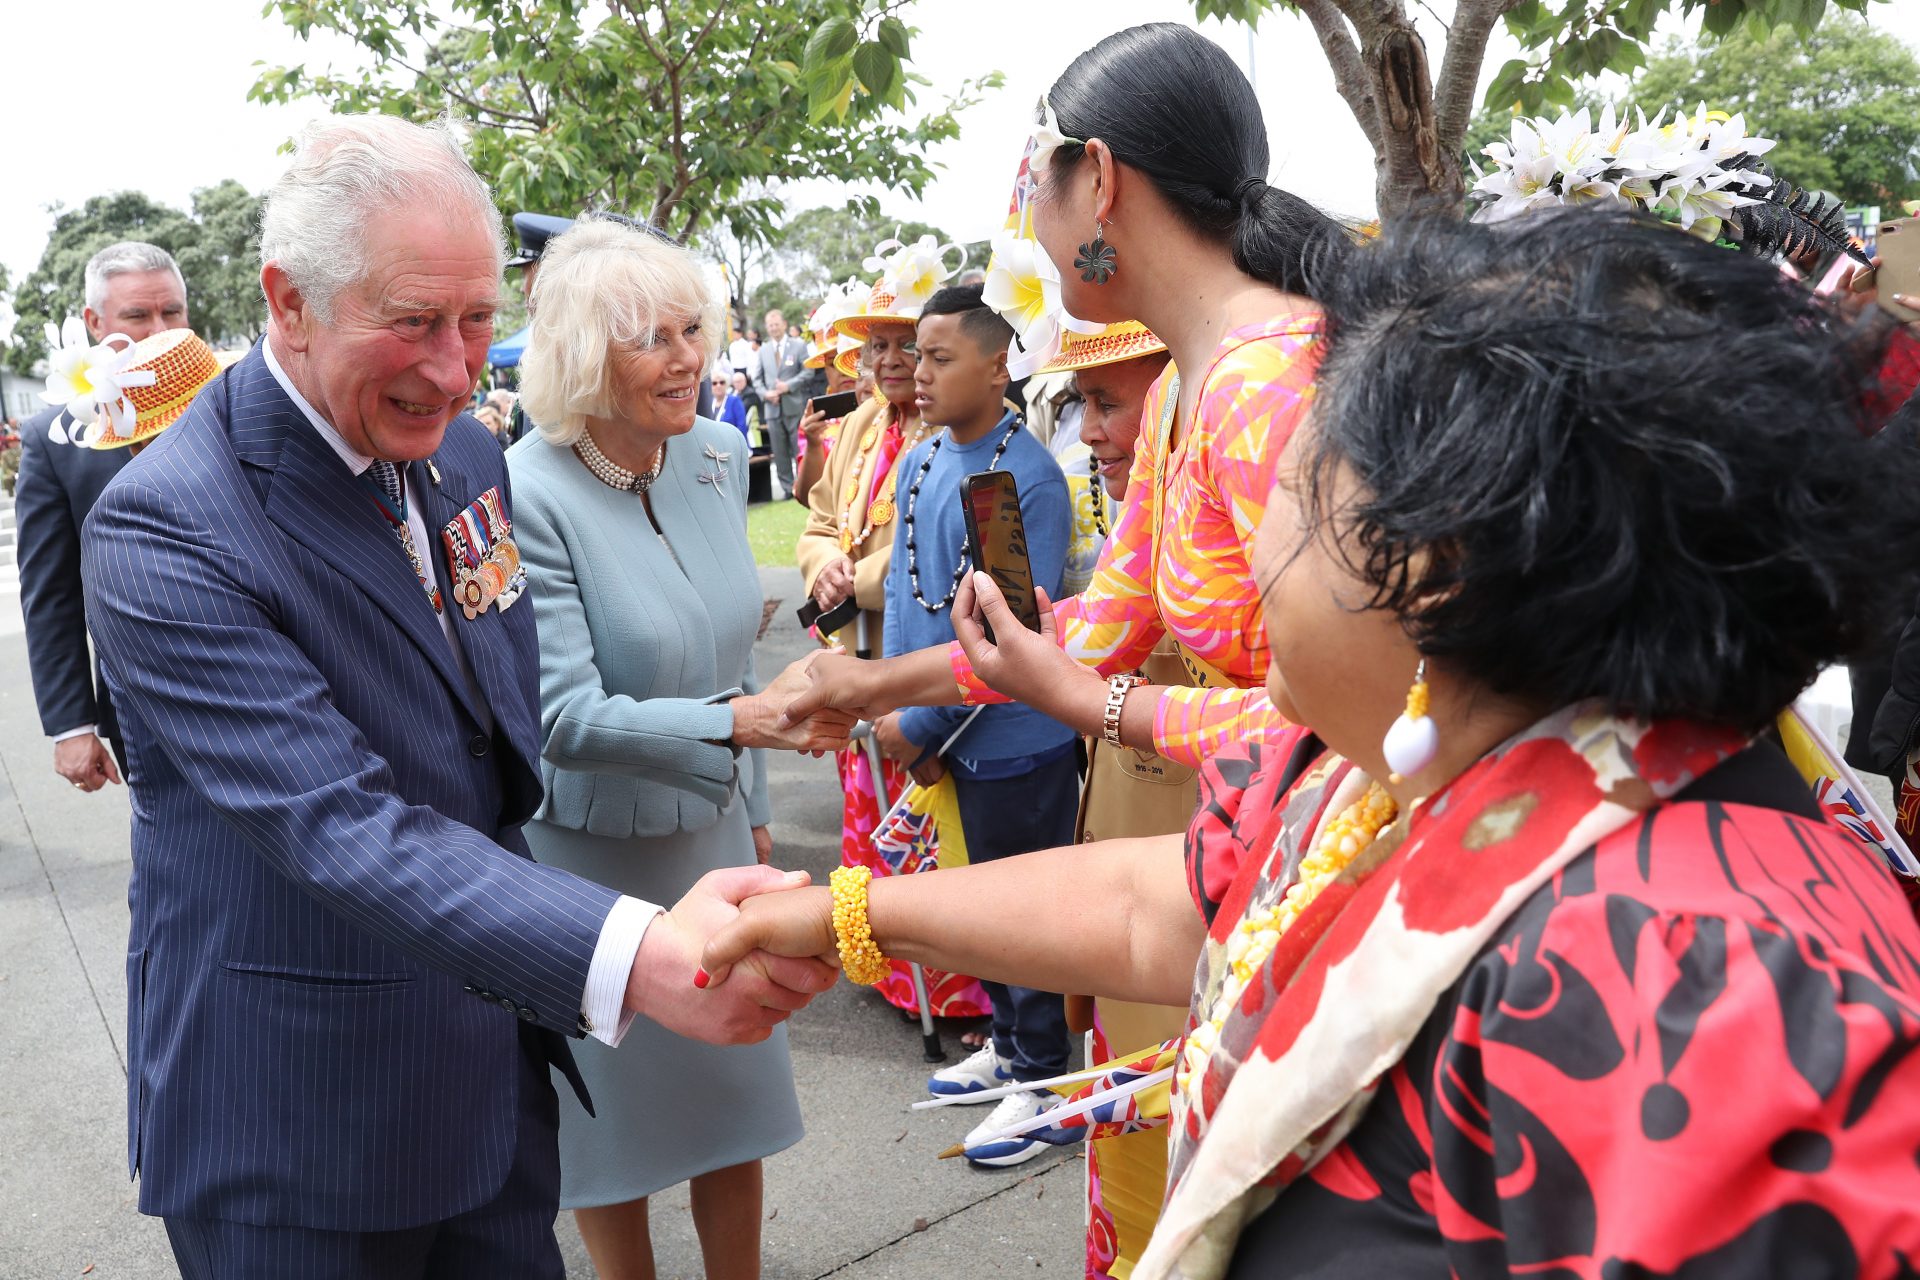 <p>In November 2019, Charles came to New Zealand with Camilla Parker Bowles.</p>